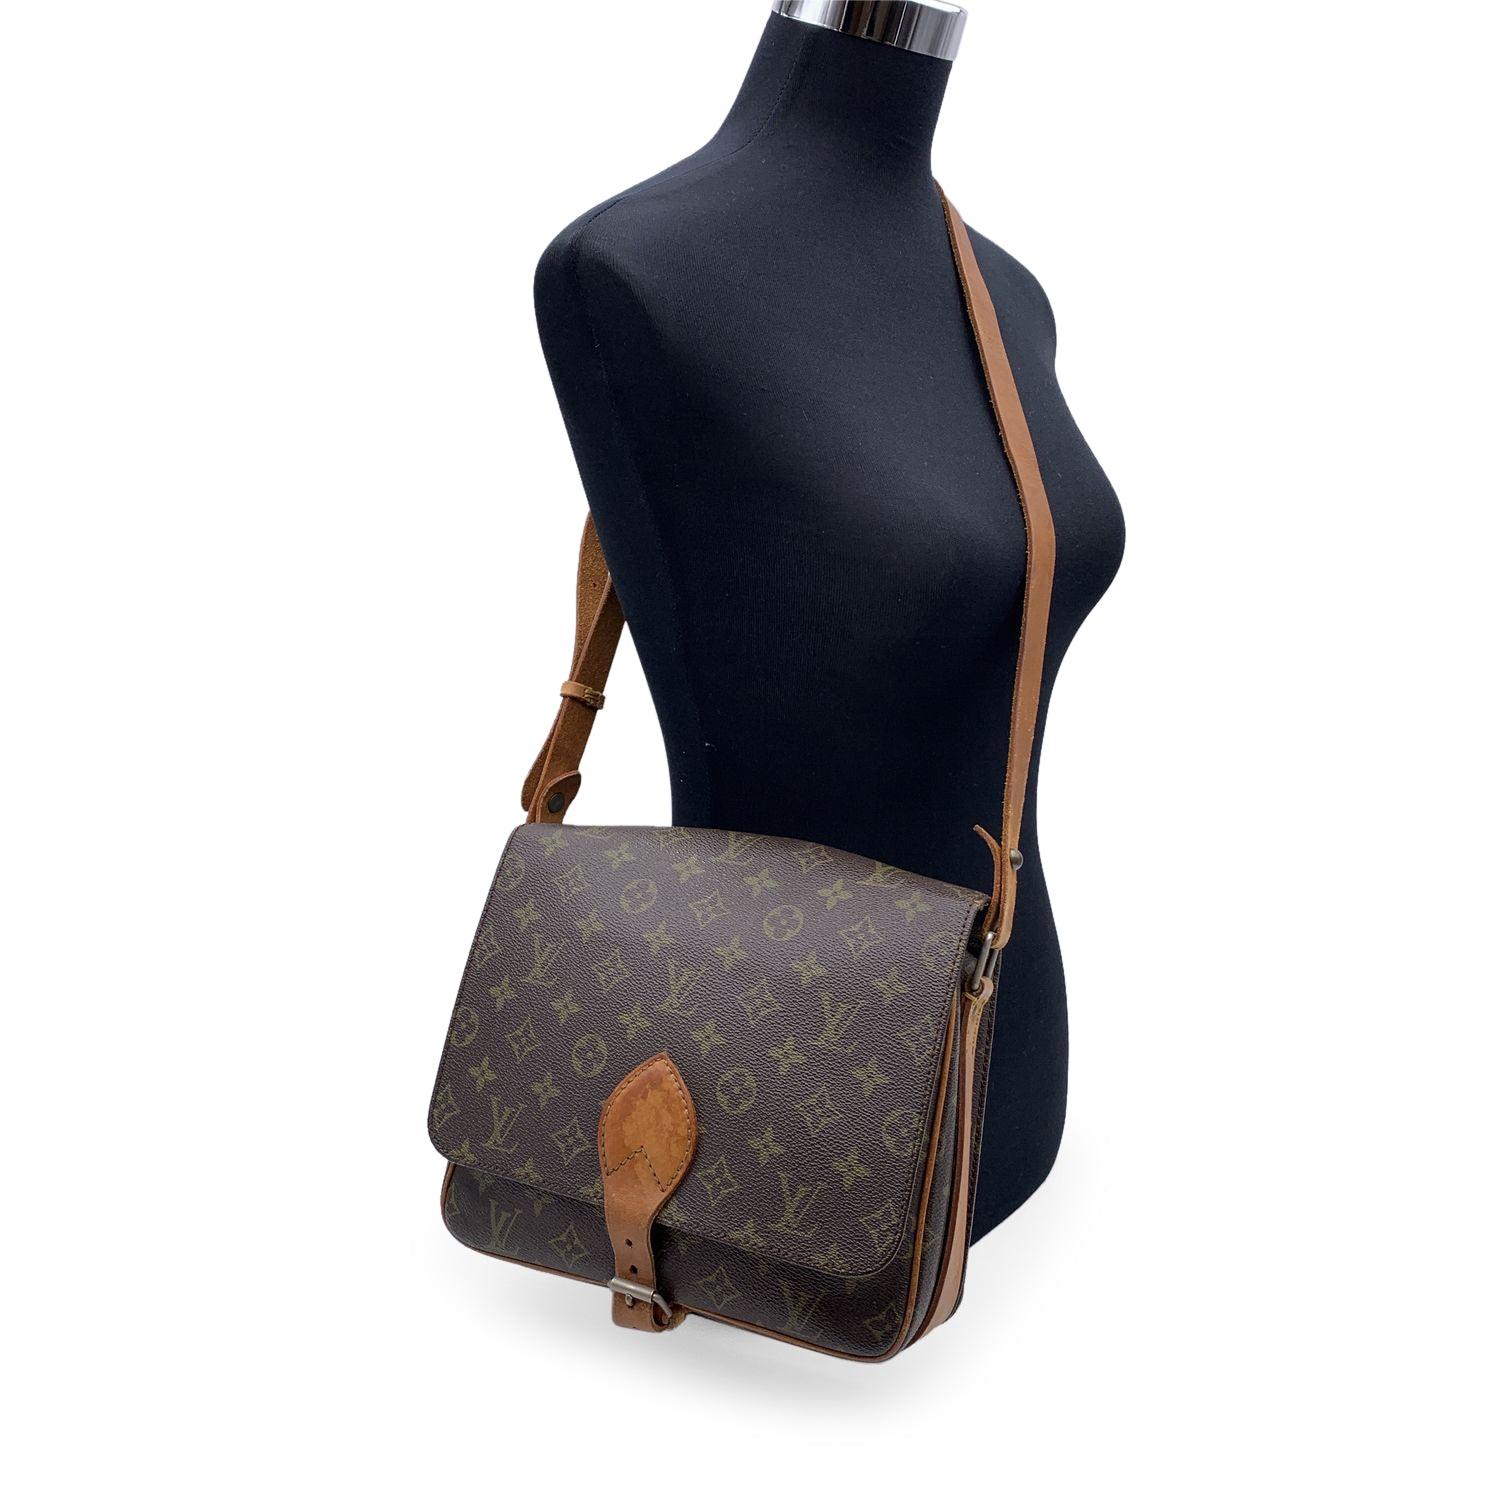 Louis Vuitton Vintage Monogram Canvas Cartouchiere MM Bag. Brown Monogram Canvas with genuine leather trim. It features a square shape with a flap top and buckle closure. Its interior in brown leather. Divider in the bag separating the inside into